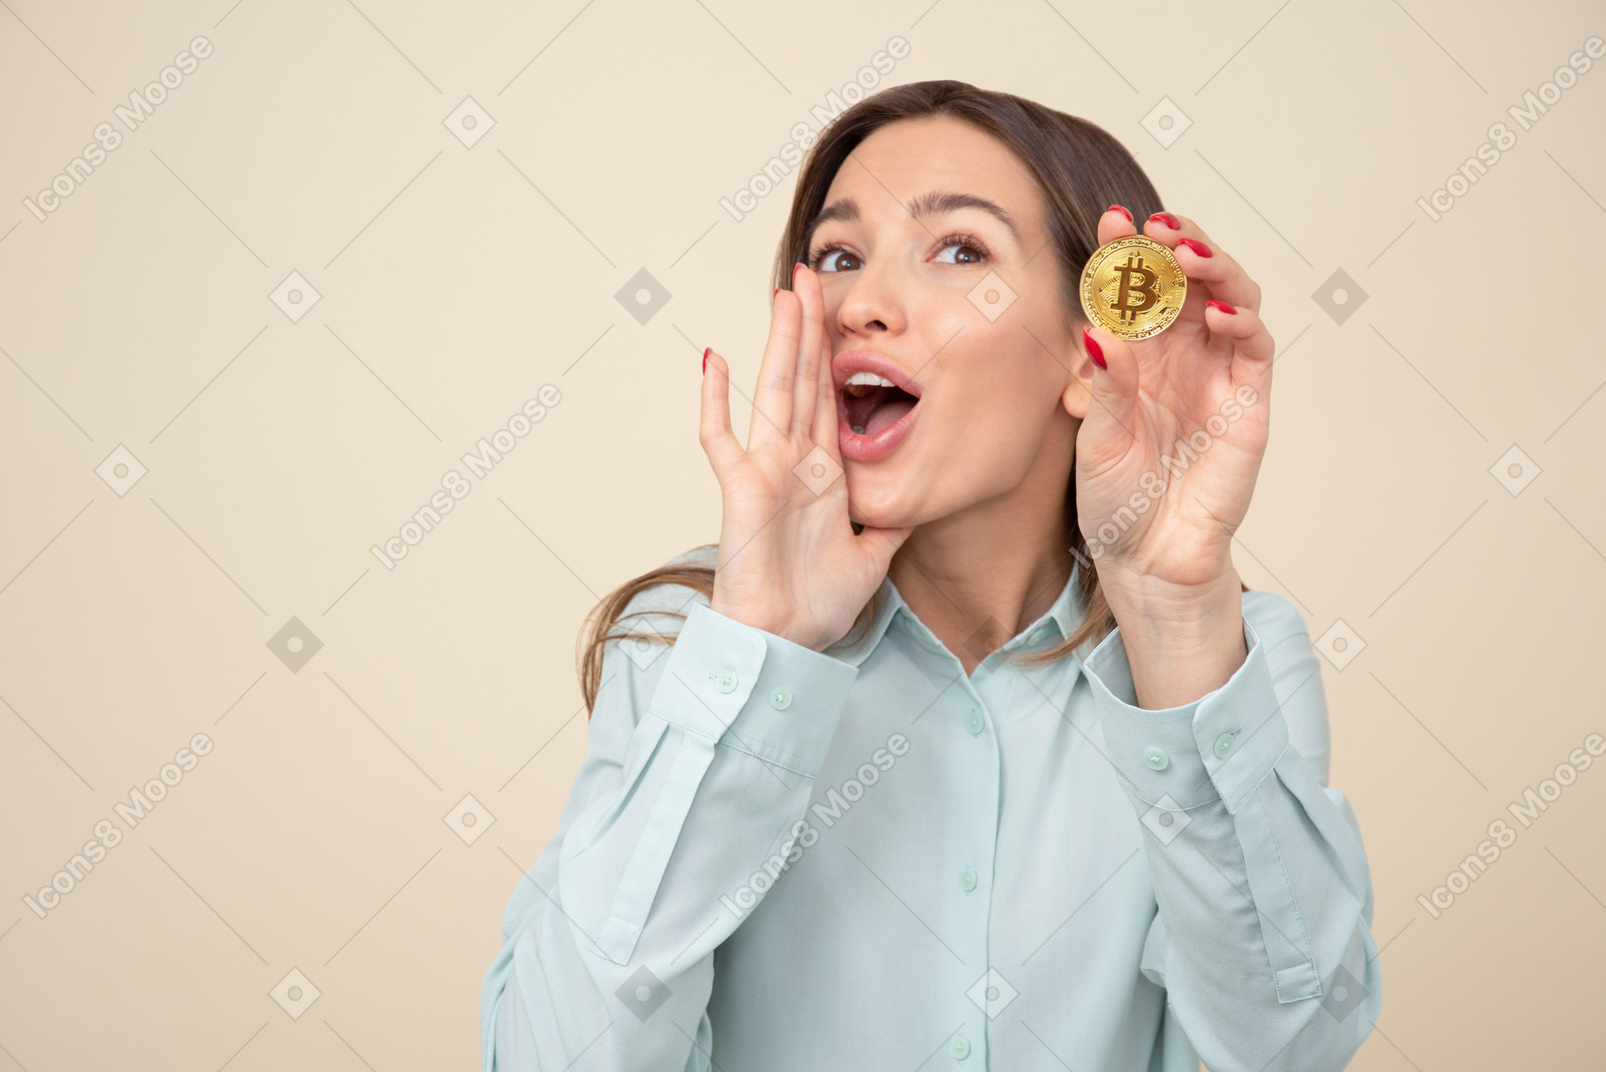 Attractive young girl holding bitcoin and screaming something